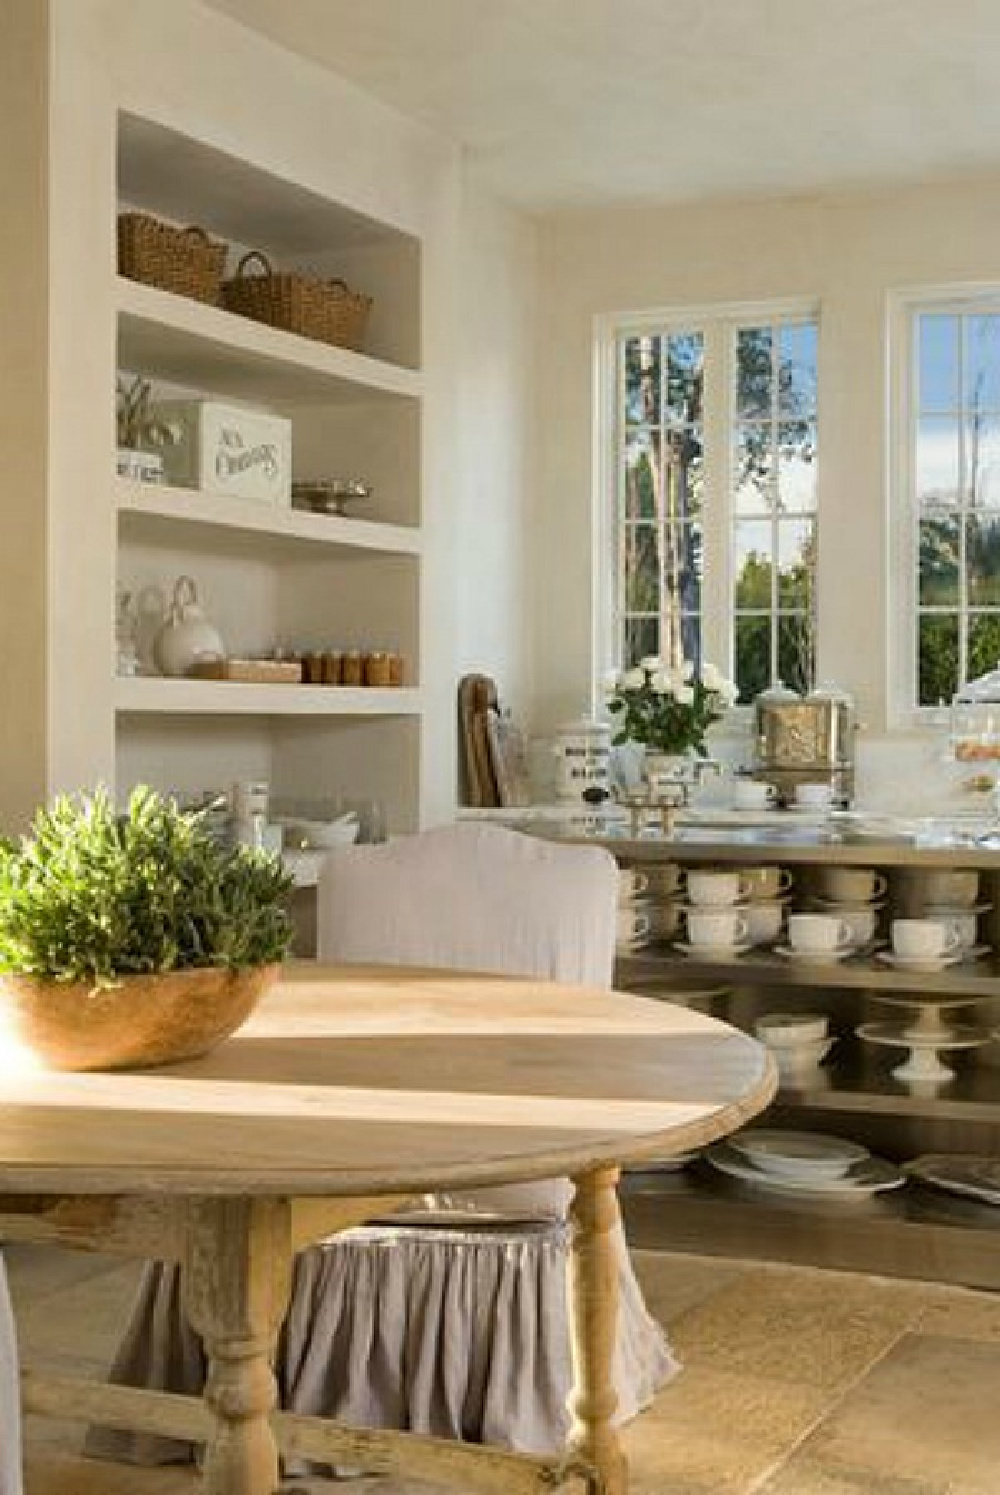 French country farmhouse kitchen with design by Pamela Pierce, architecture by Reagan Andre, and constructtion by MDD. Photo by Peter Vitale.